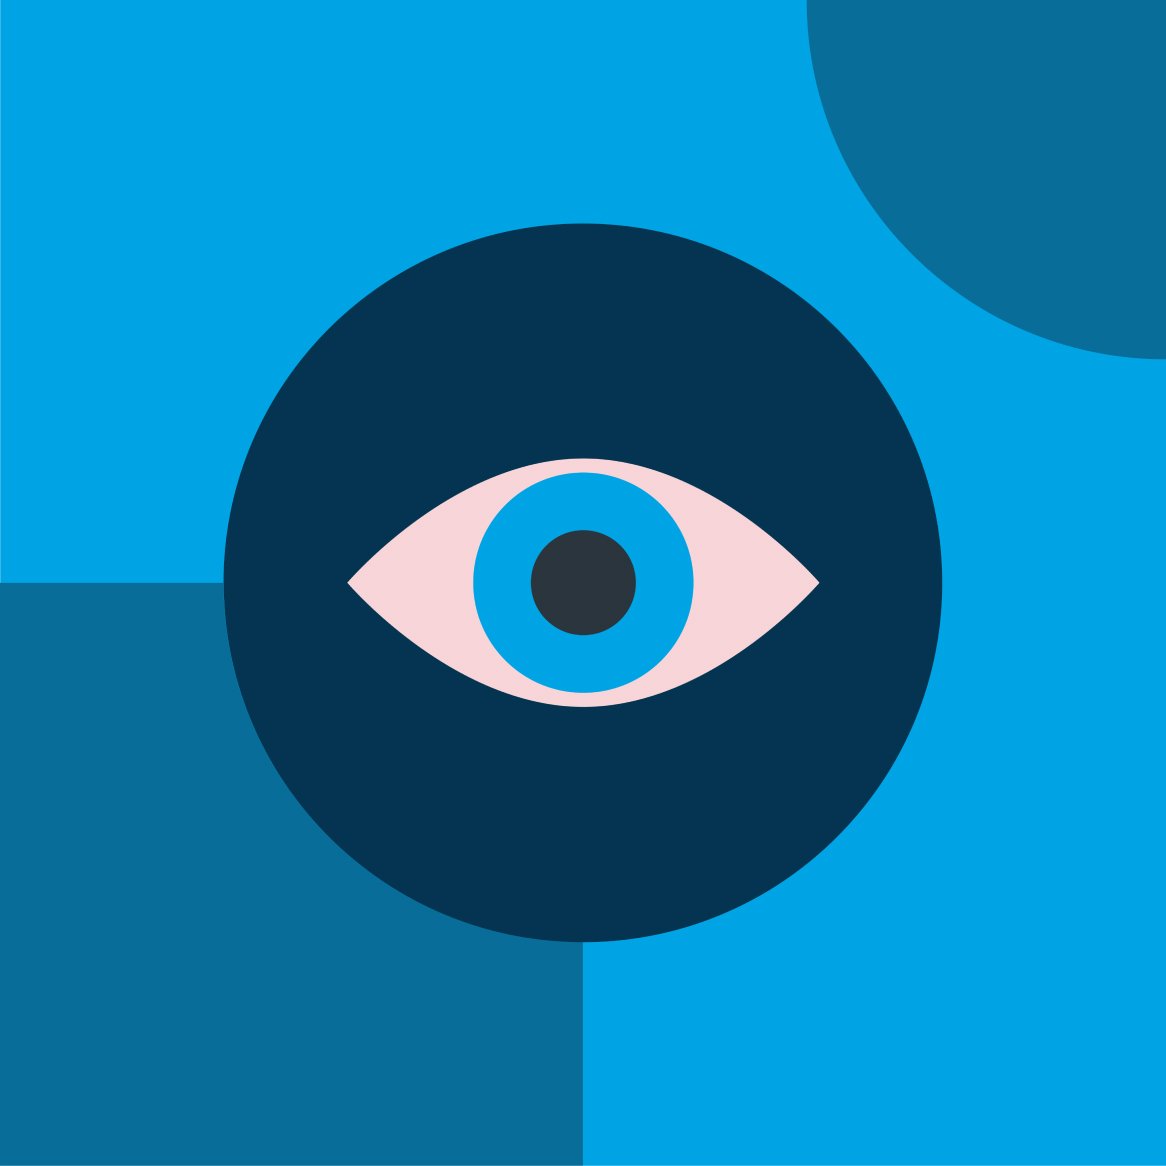 Artwork including an illustration of a dry eye on a blue background